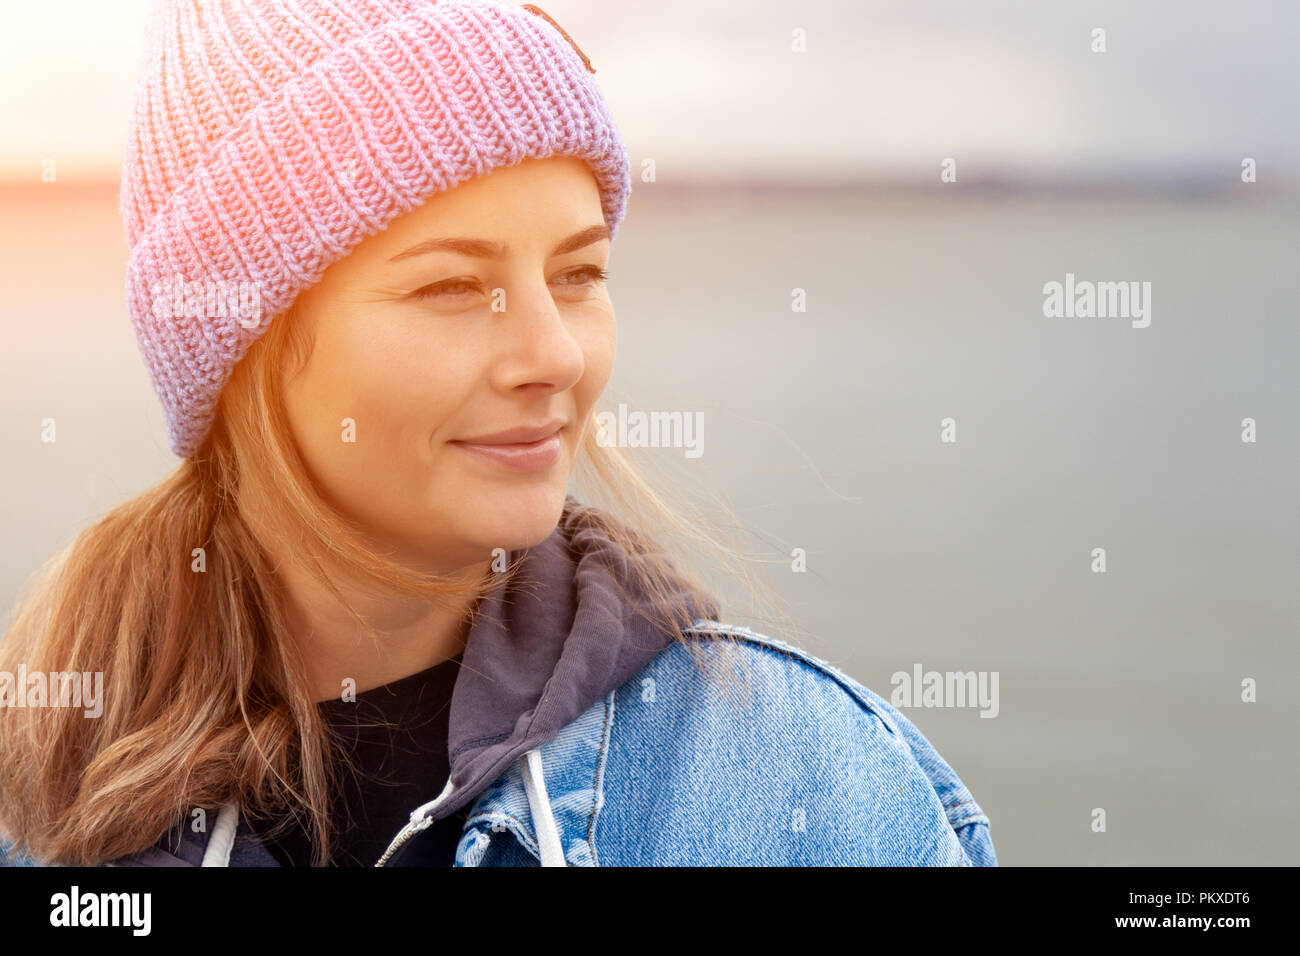 Closeup of happy beautiful young woman in blue knitted hat and denim coat, smiling, posing, outdoors on sunny autumn day. Stock Photo